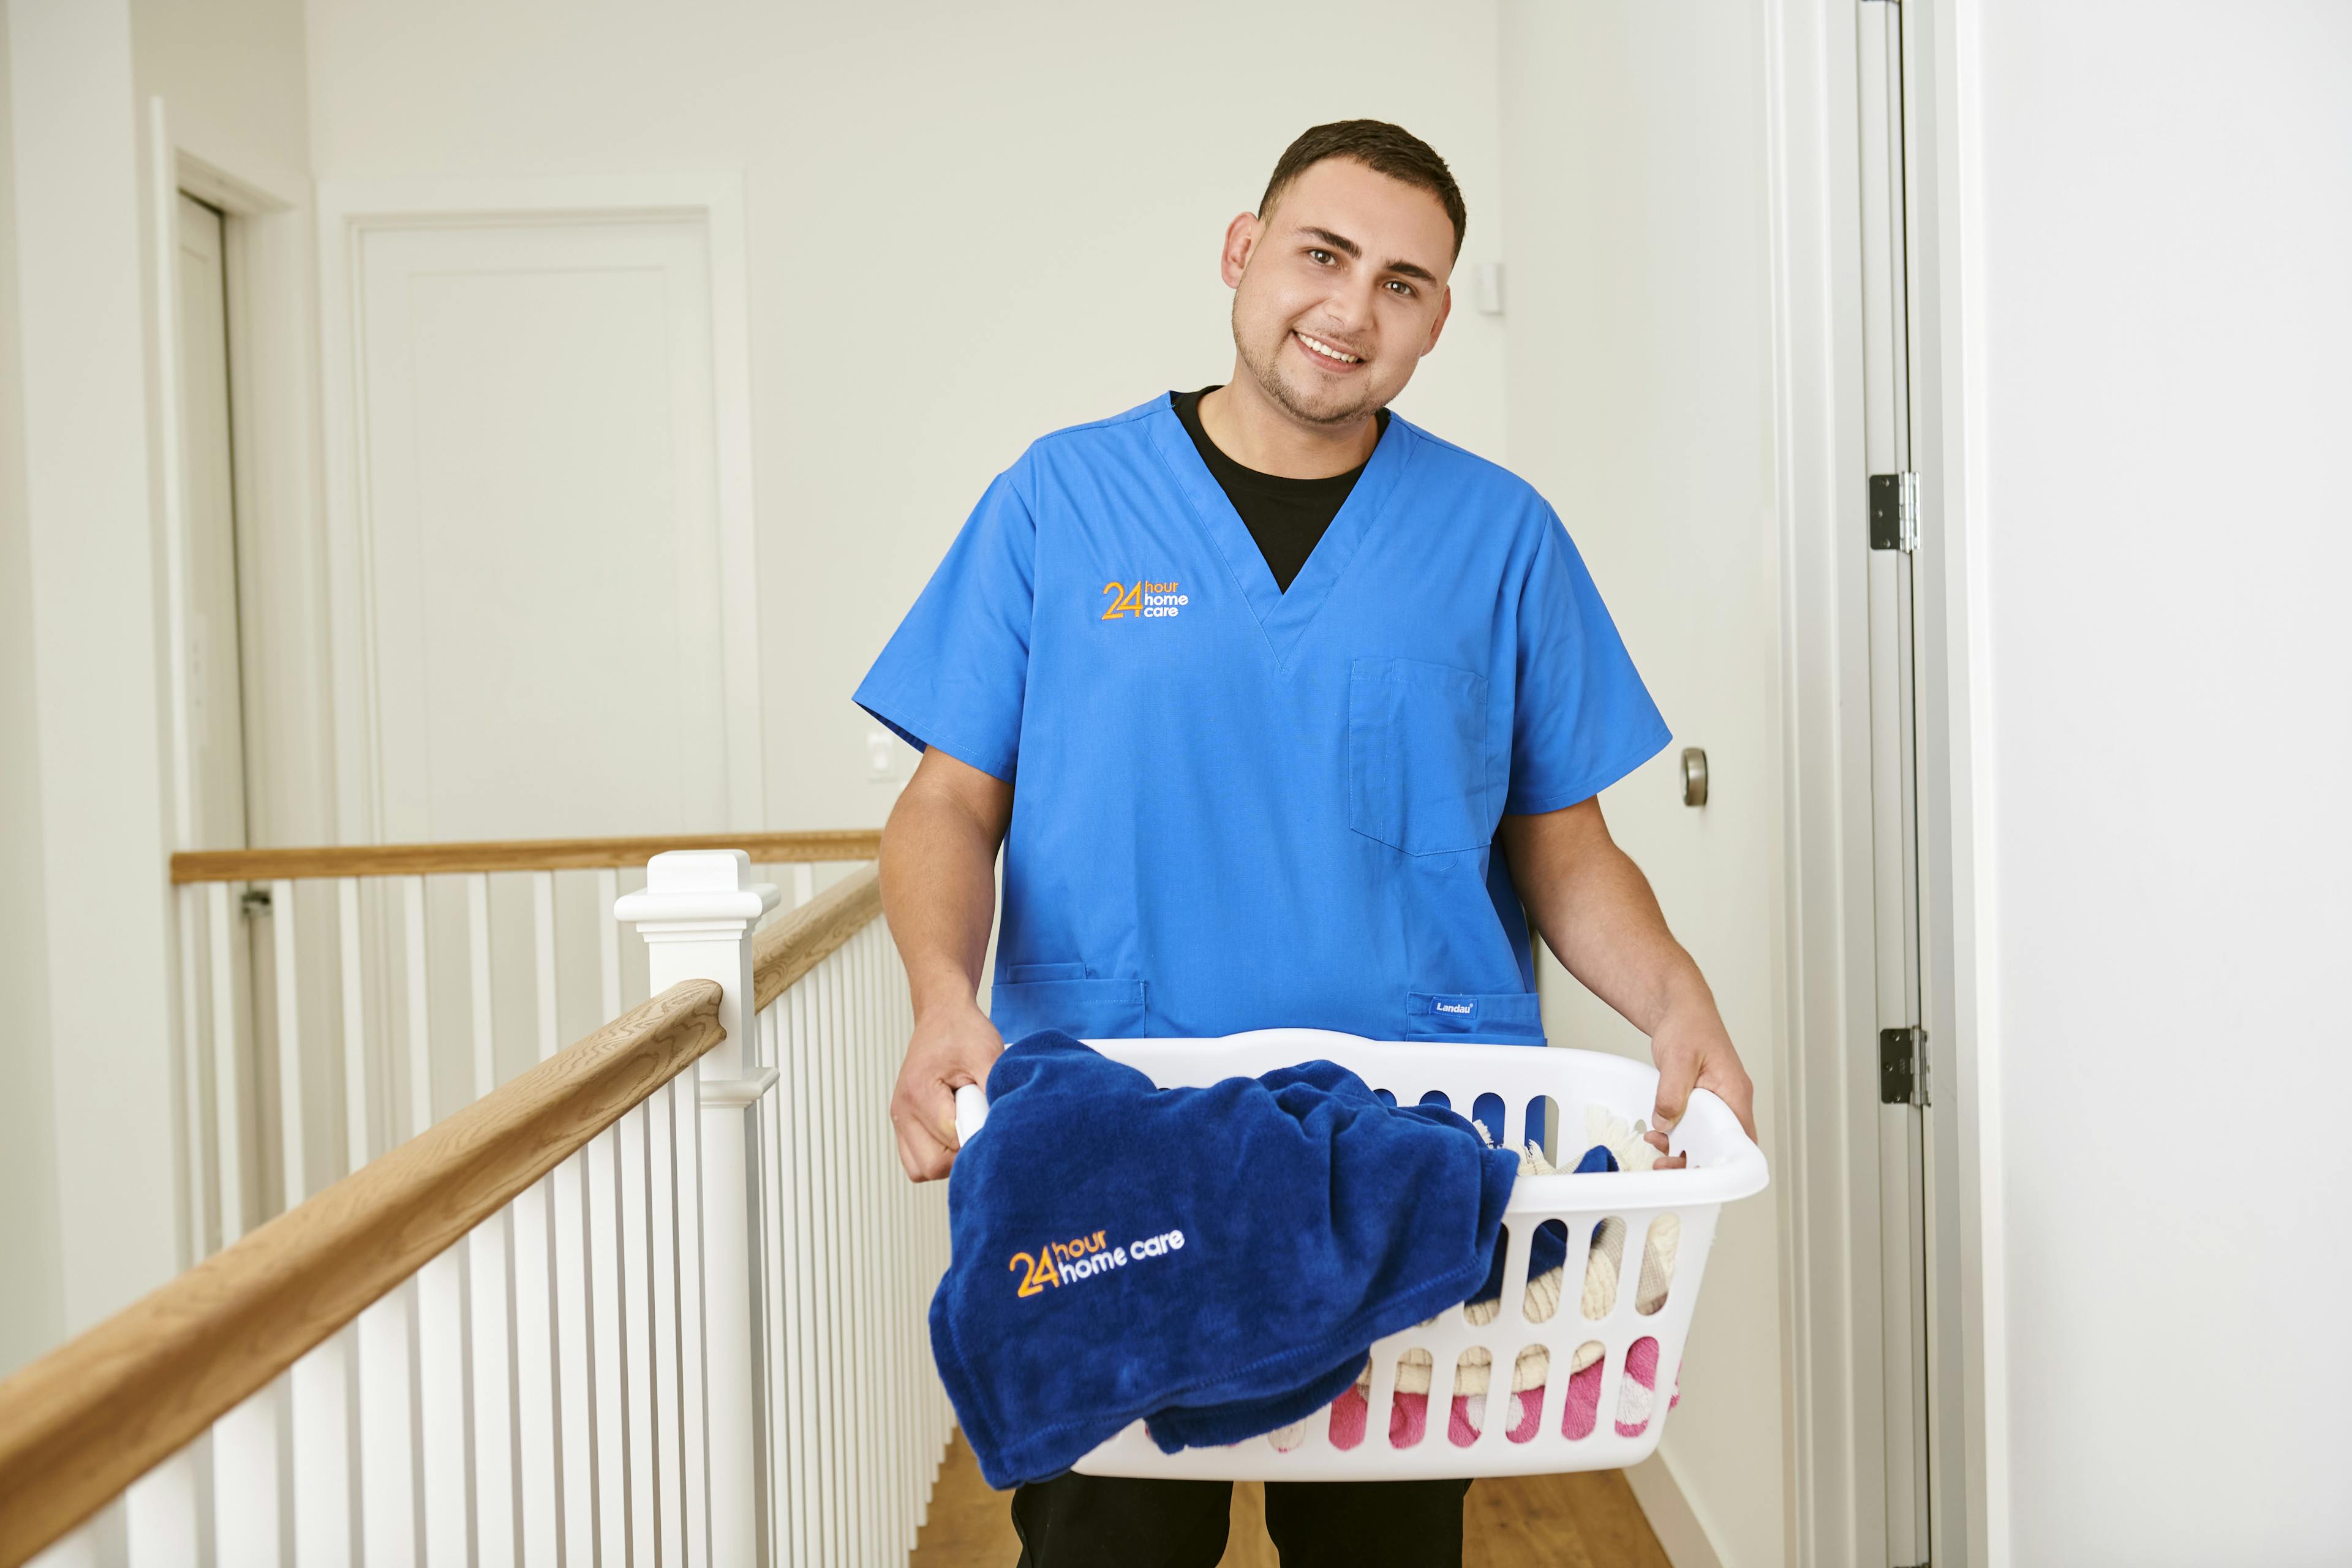 A 24 hour home care giver holding a laundry basket